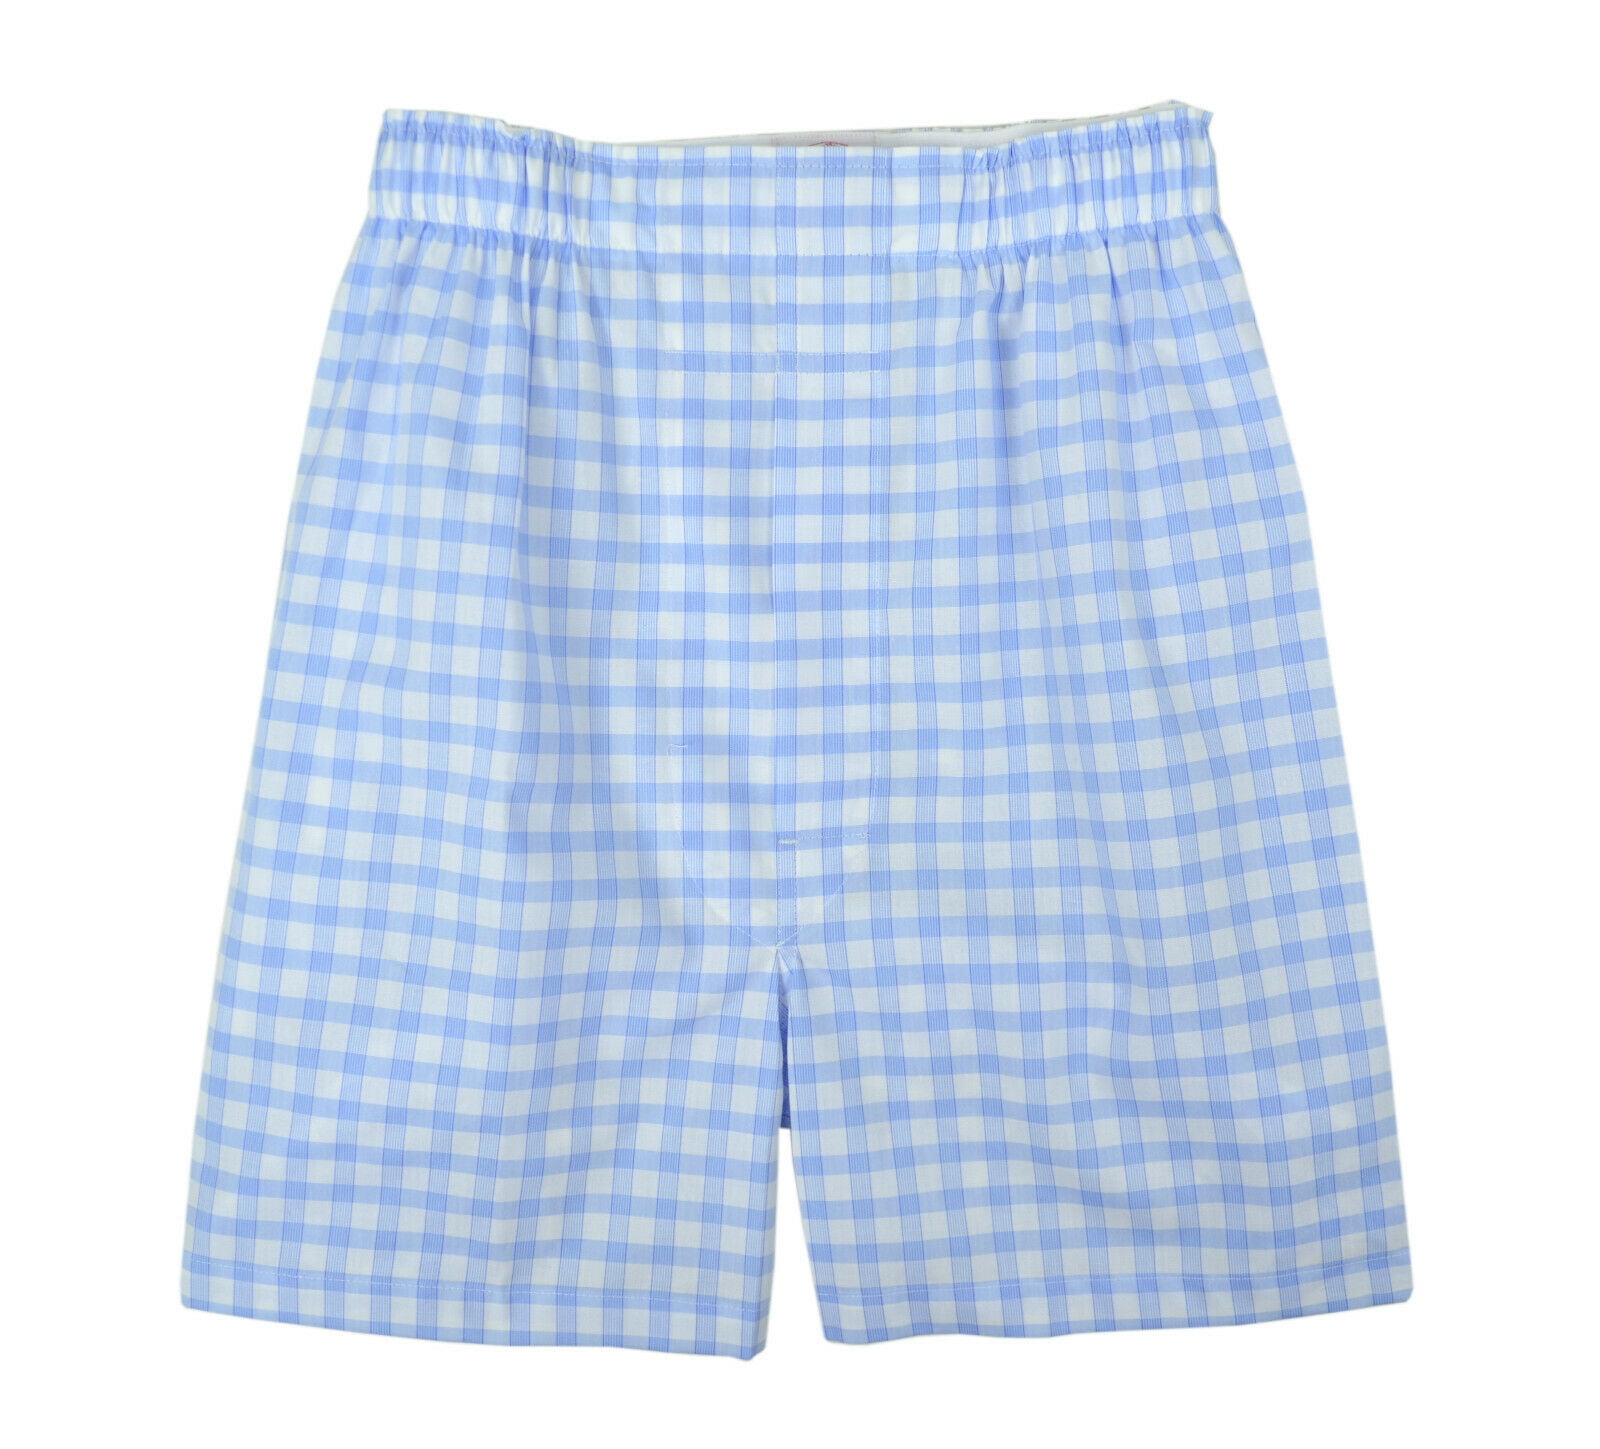 New Brooks Brothers Mens Light Blue White Check Regular Fit Boxers XL ...